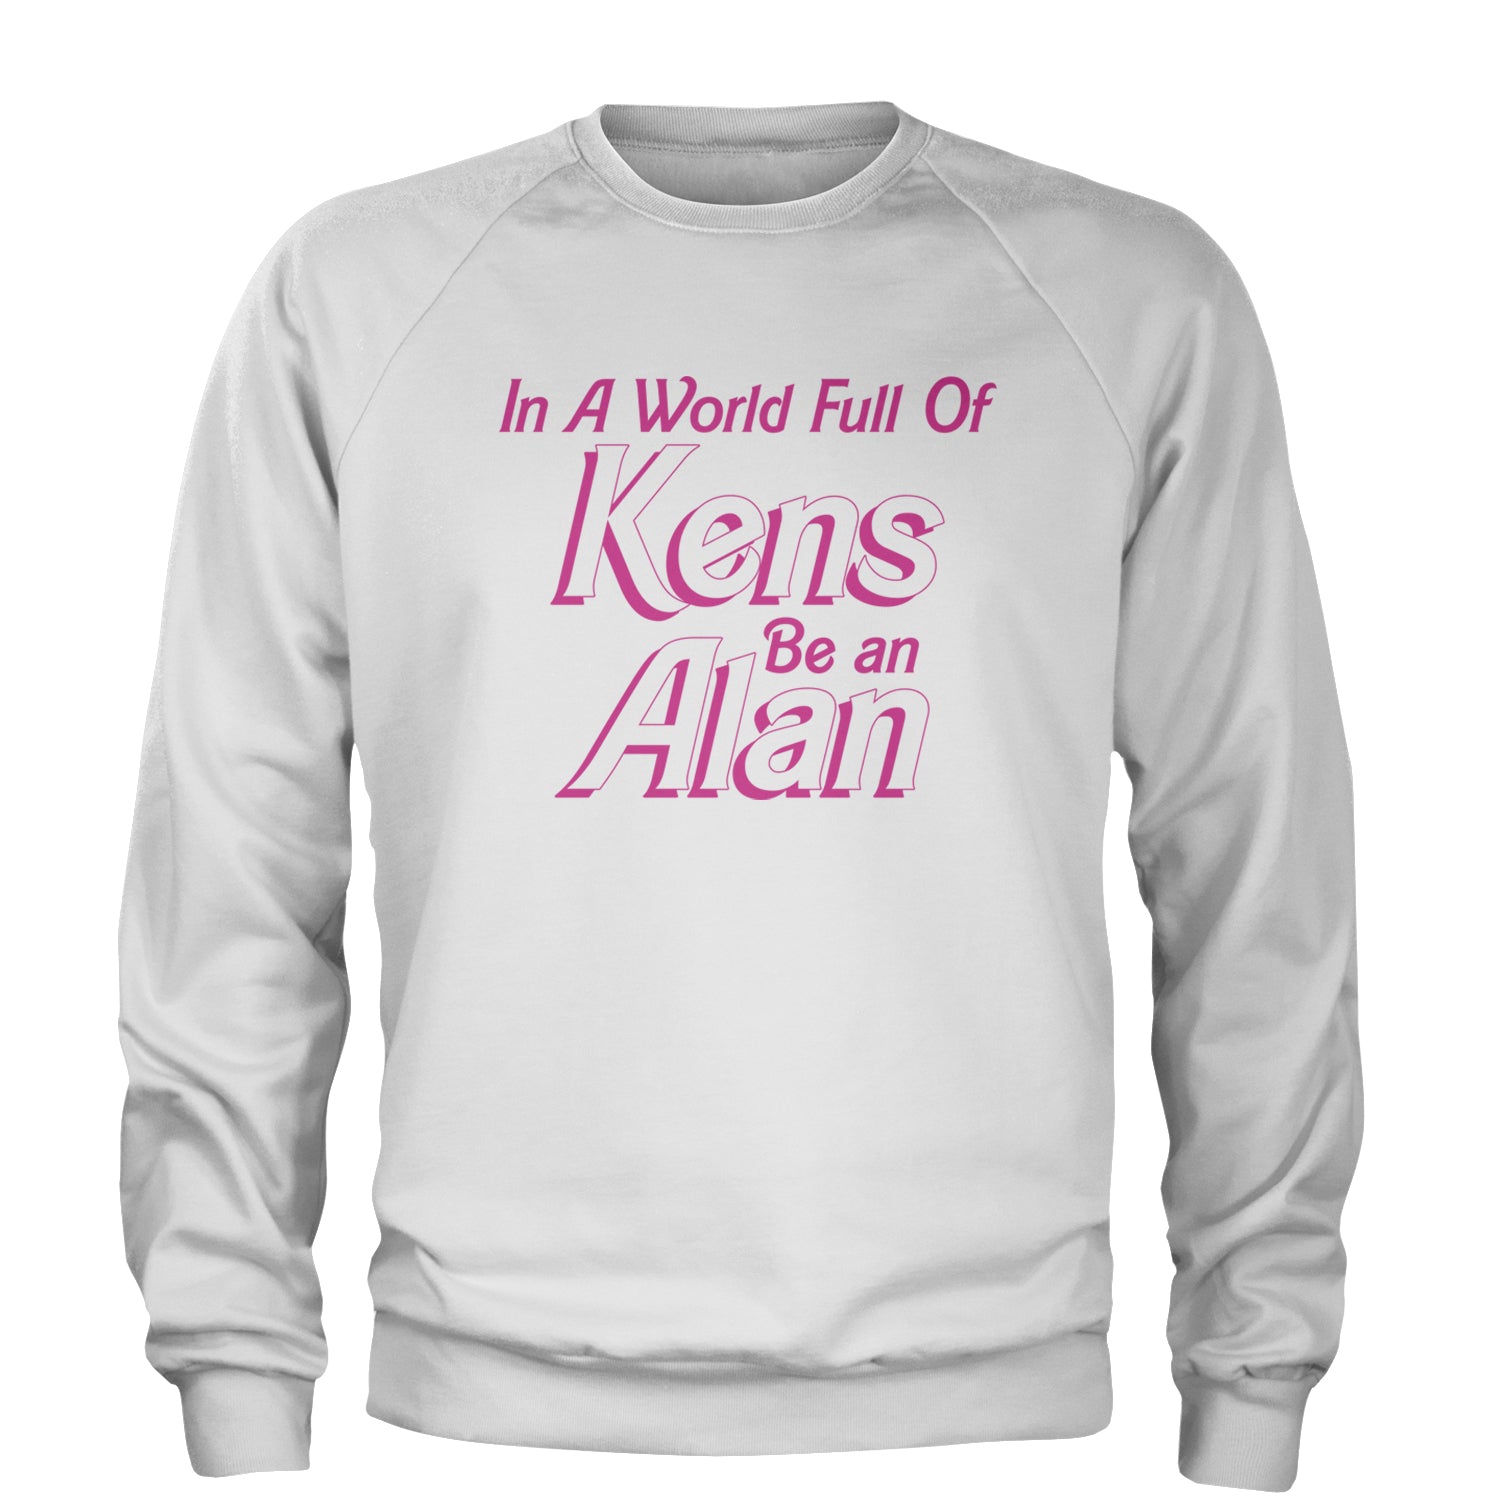 In A World Full Of Kens, Be an Alan Adult Crewneck Sweatshirt